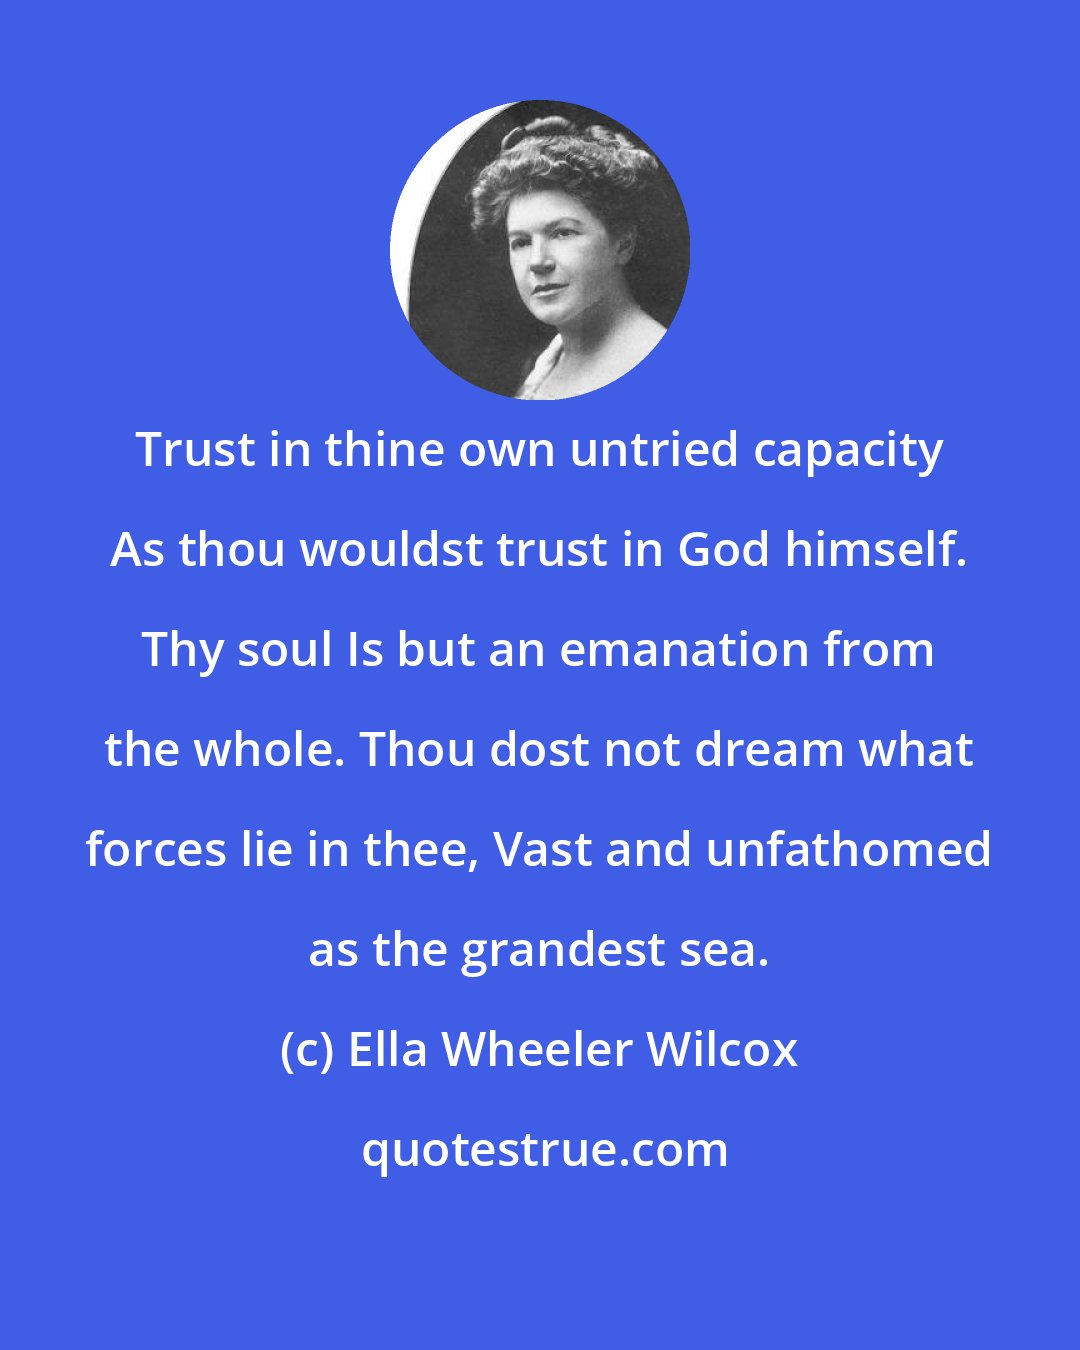 Ella Wheeler Wilcox: Trust in thine own untried capacity As thou wouldst trust in God himself. Thy soul Is but an emanation from the whole. Thou dost not dream what forces lie in thee, Vast and unfathomed as the grandest sea.